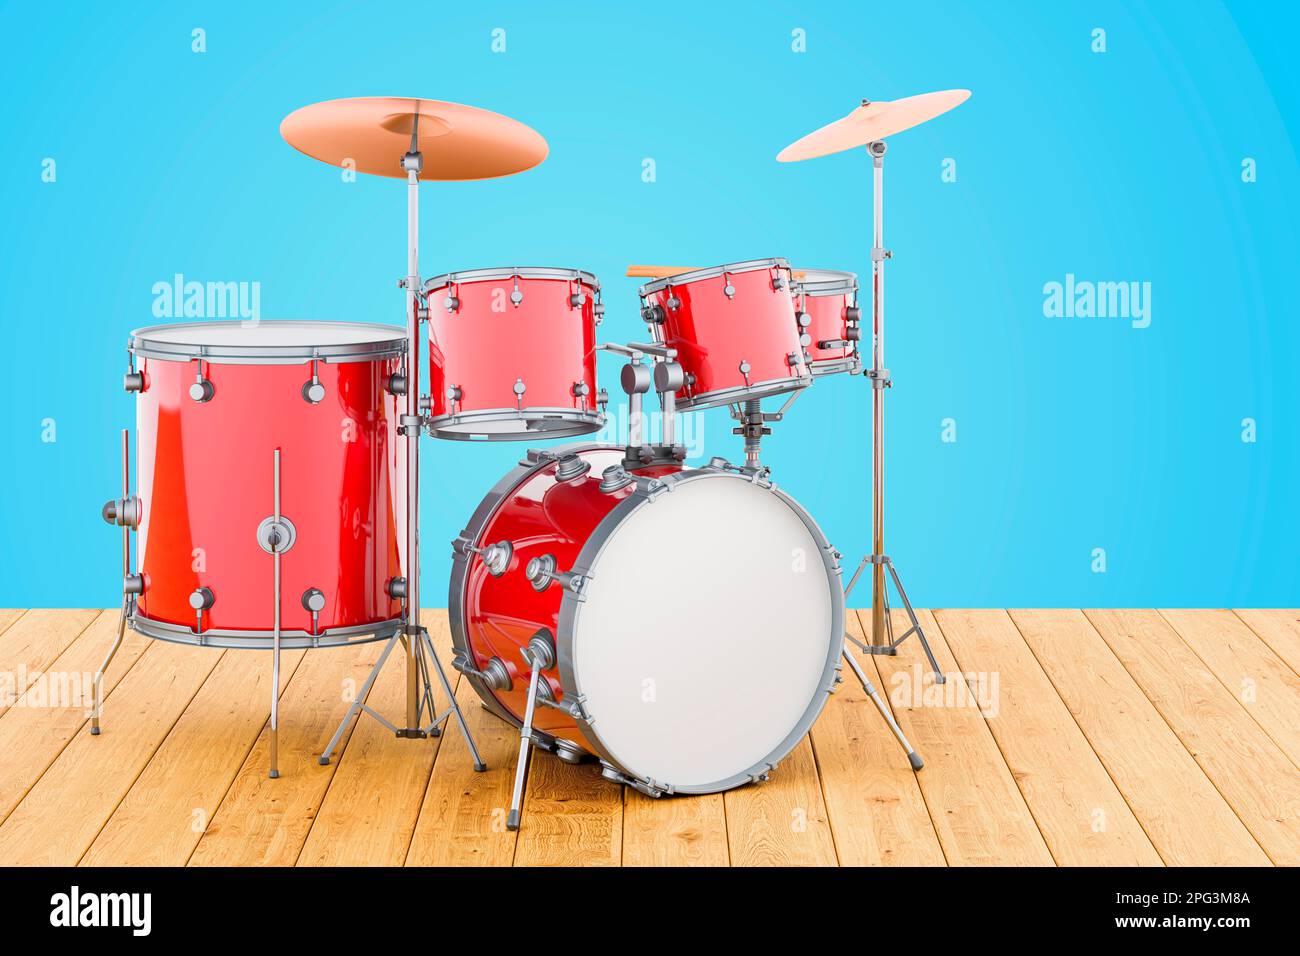 Drum kit on the wooden table, 3D rendering Stock Photo